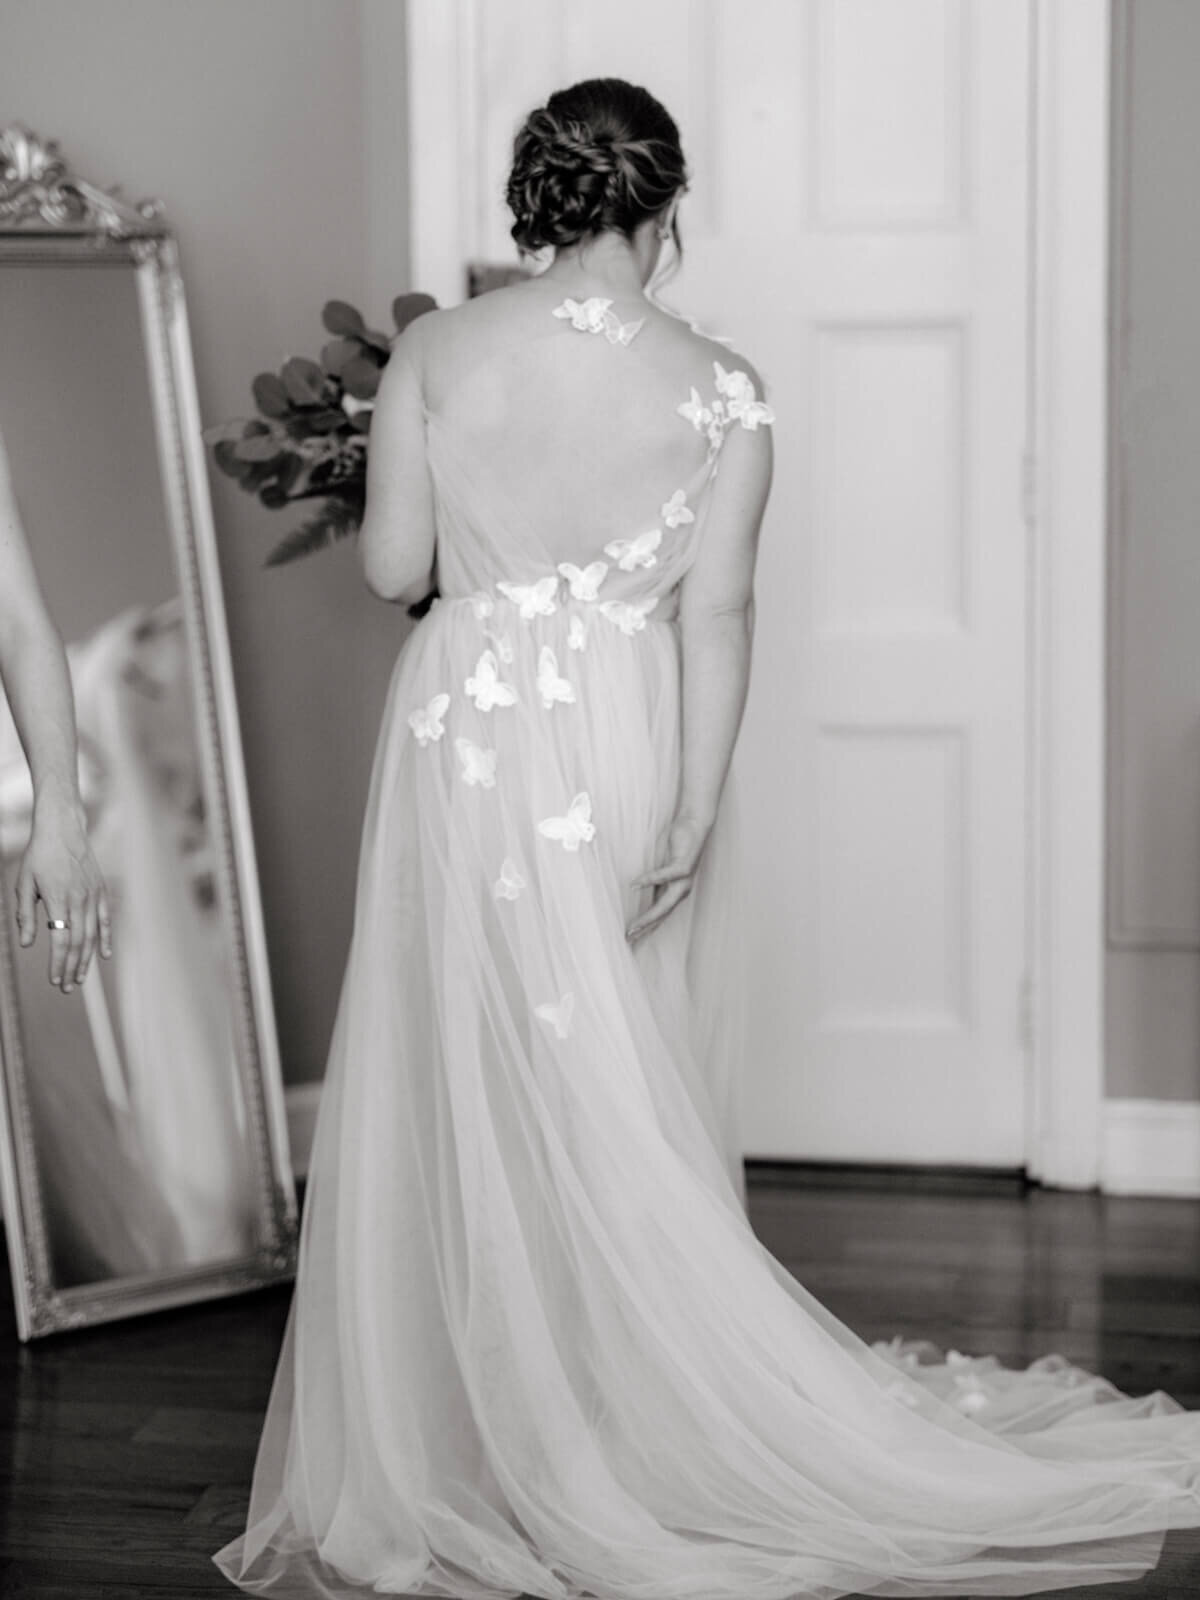 Back view of a bride  facing the door inside a room, with a mirror on the side